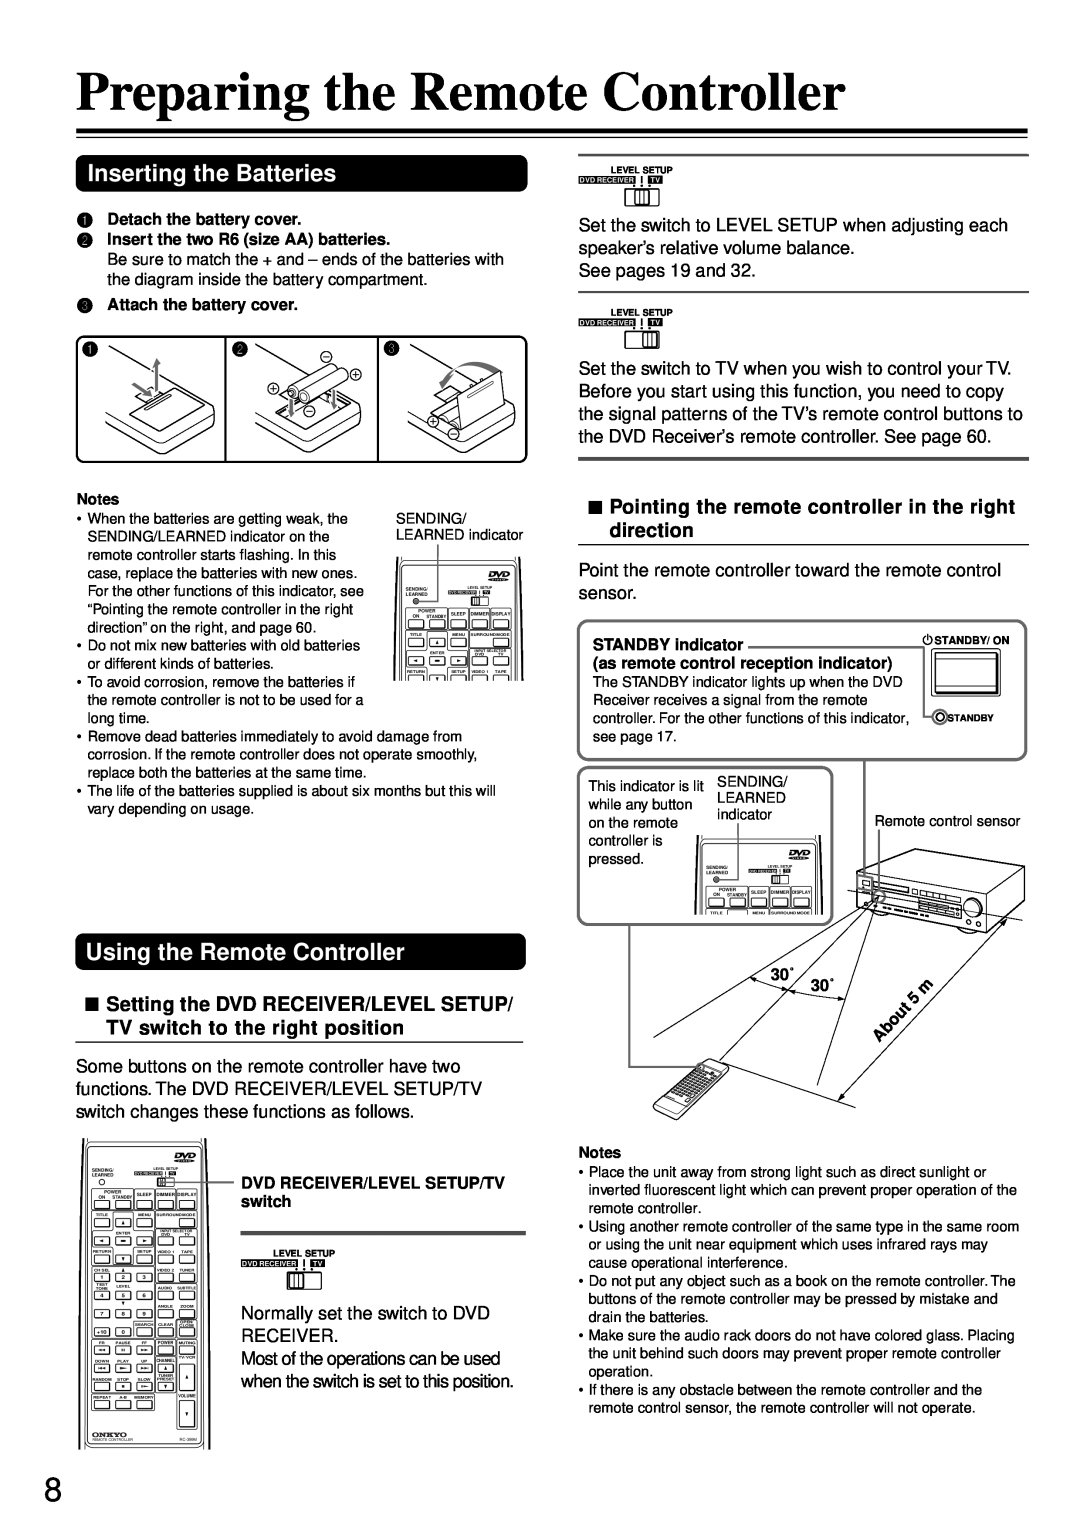 Onkyo DR-90 instruction manual Preparing the Remote Controller, Inserting the Batteries, Using the Remote Controller 